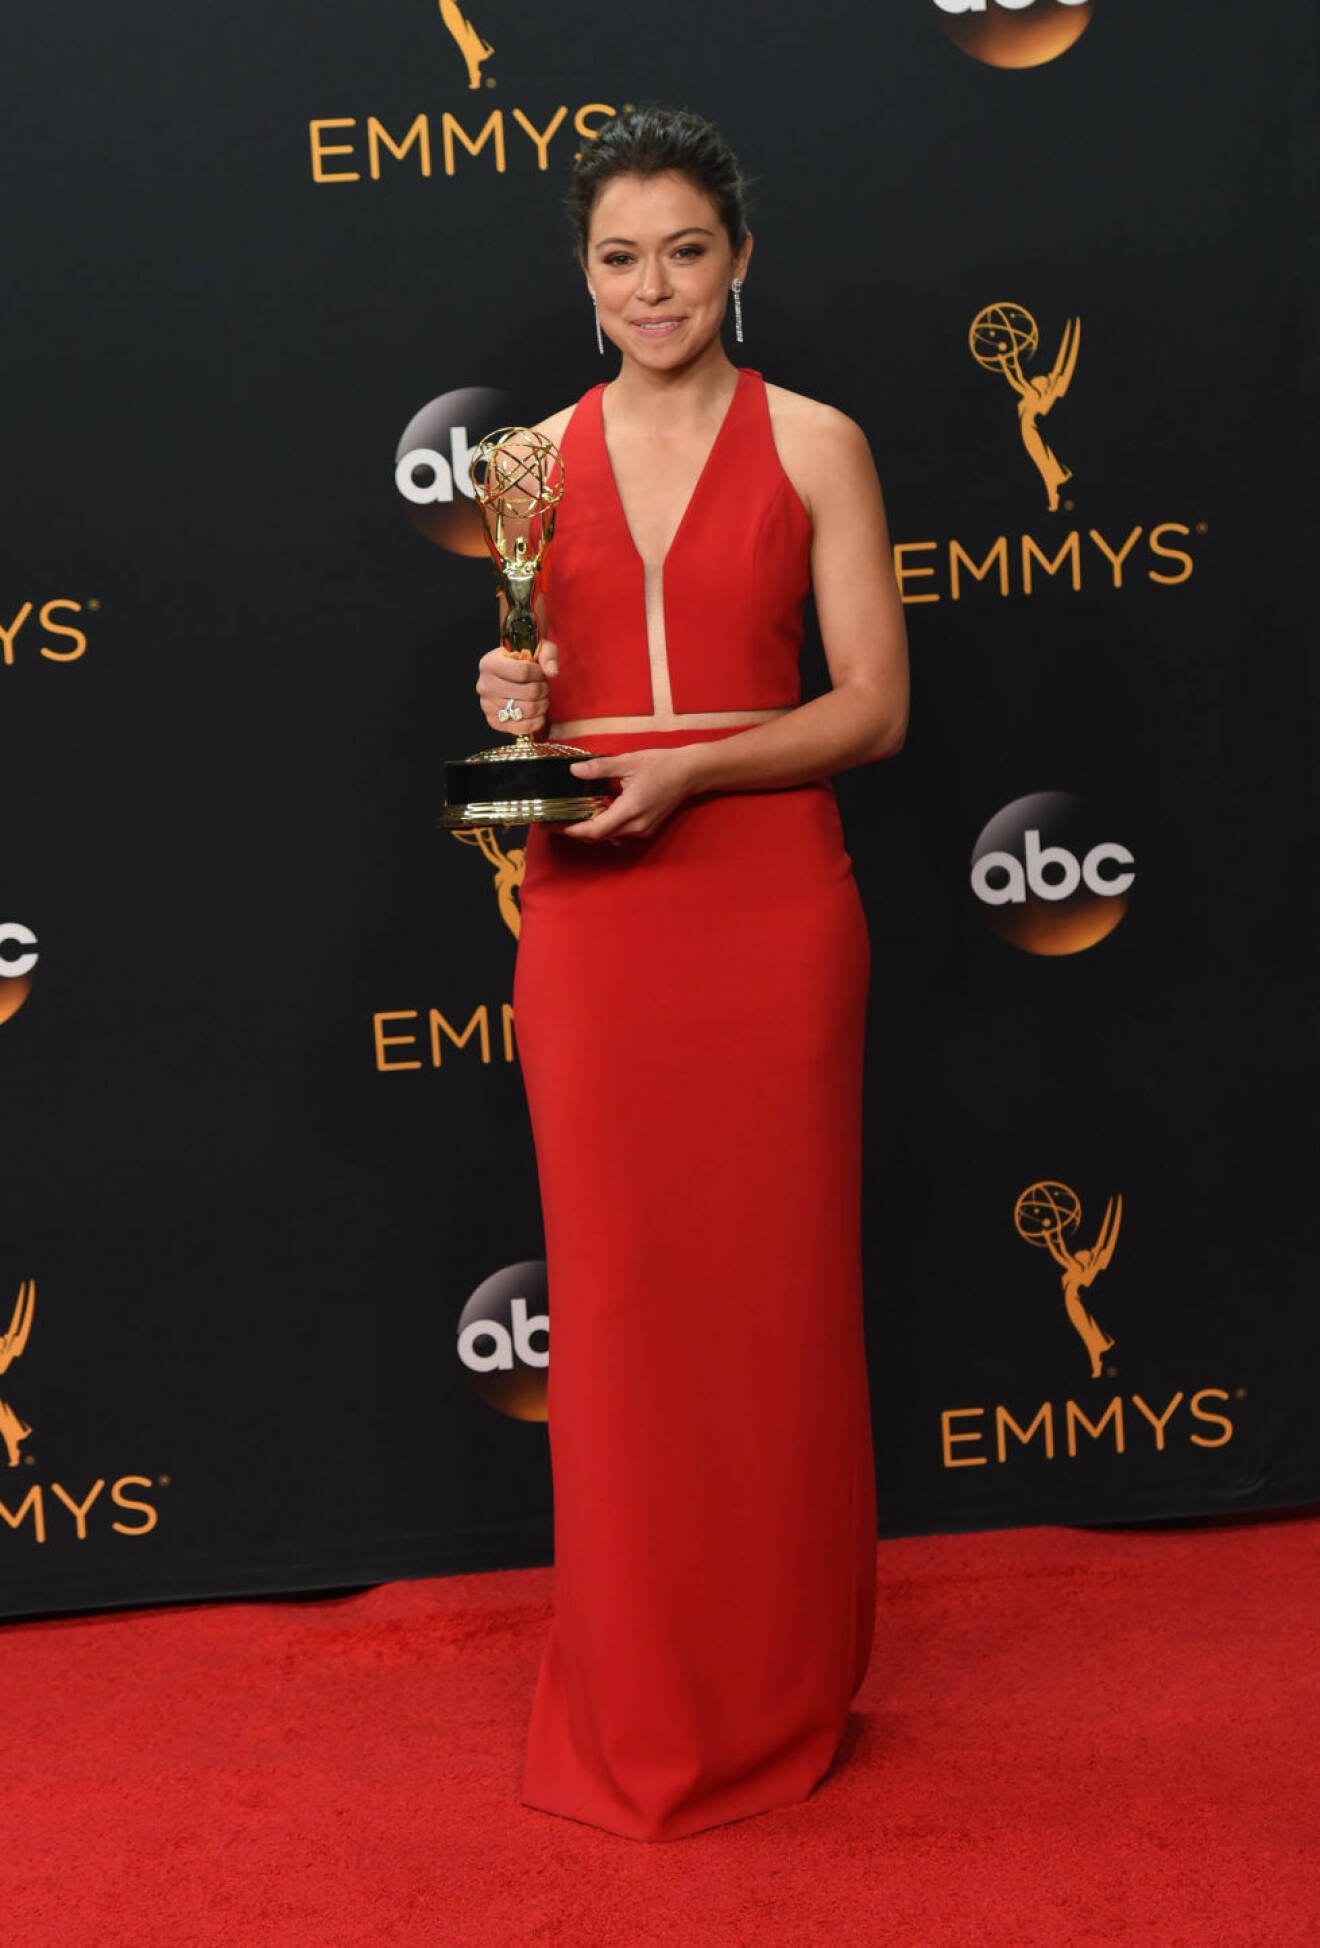 6100650 52178853 Celebrities attend the 2016 Emmy Awards held at the Microsoft theatre in Los Angeles, California on September 18, 2016. Celebrities attend the 2016 Emmy Awards held at the Microsoft theatre in Los Angeles, California on September 18, 2016. Pictured: Tatiana Maslany FameFlynet, Inc - Beverly Hills, CA, USA - +1 (310) 505-9876 RESTRICTIONS APPLY: NO FRANCE COPYRIGHT STELLA PICTURES